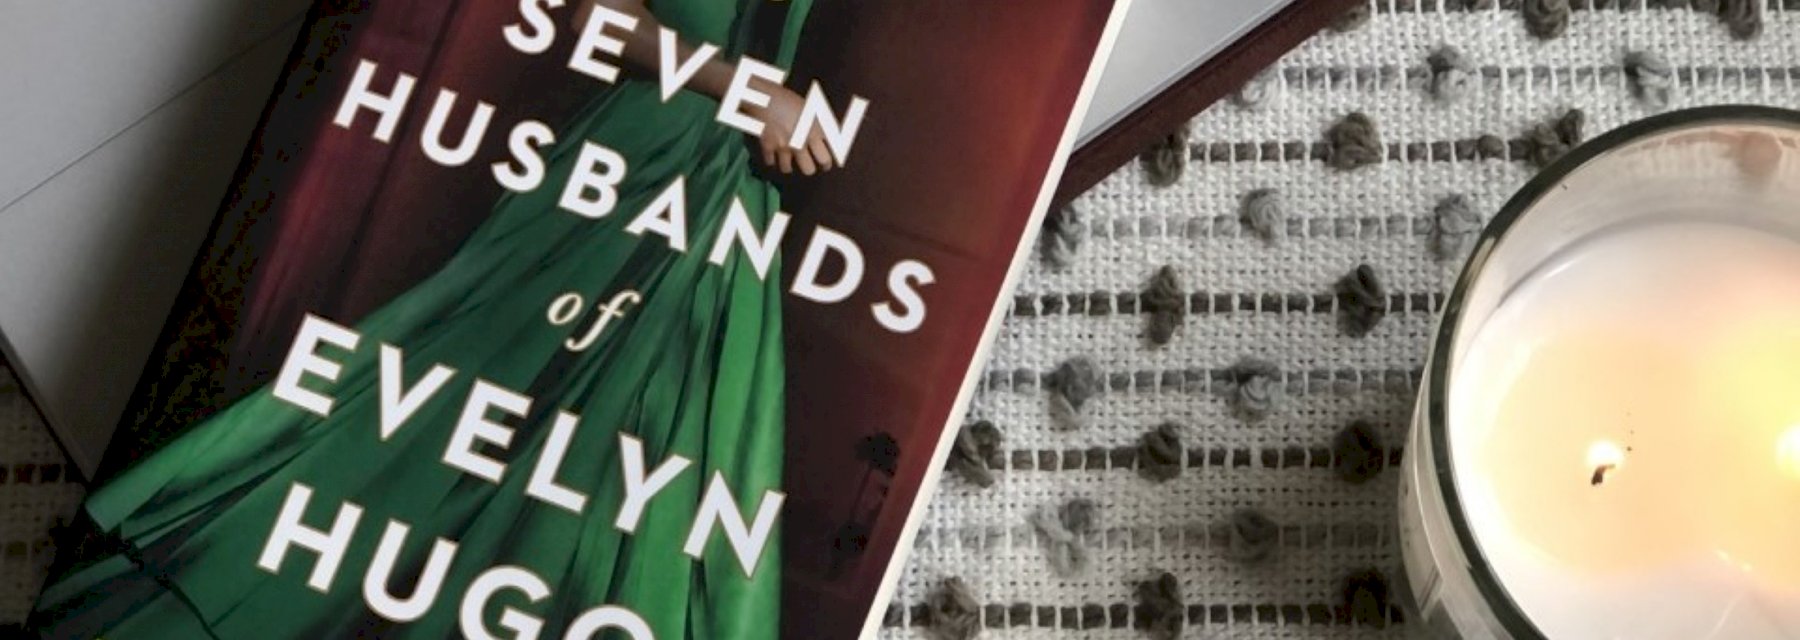 Book review: ‘The Seven Husbands of Evelyn Hugo’ by Taylor Jenkins Reid